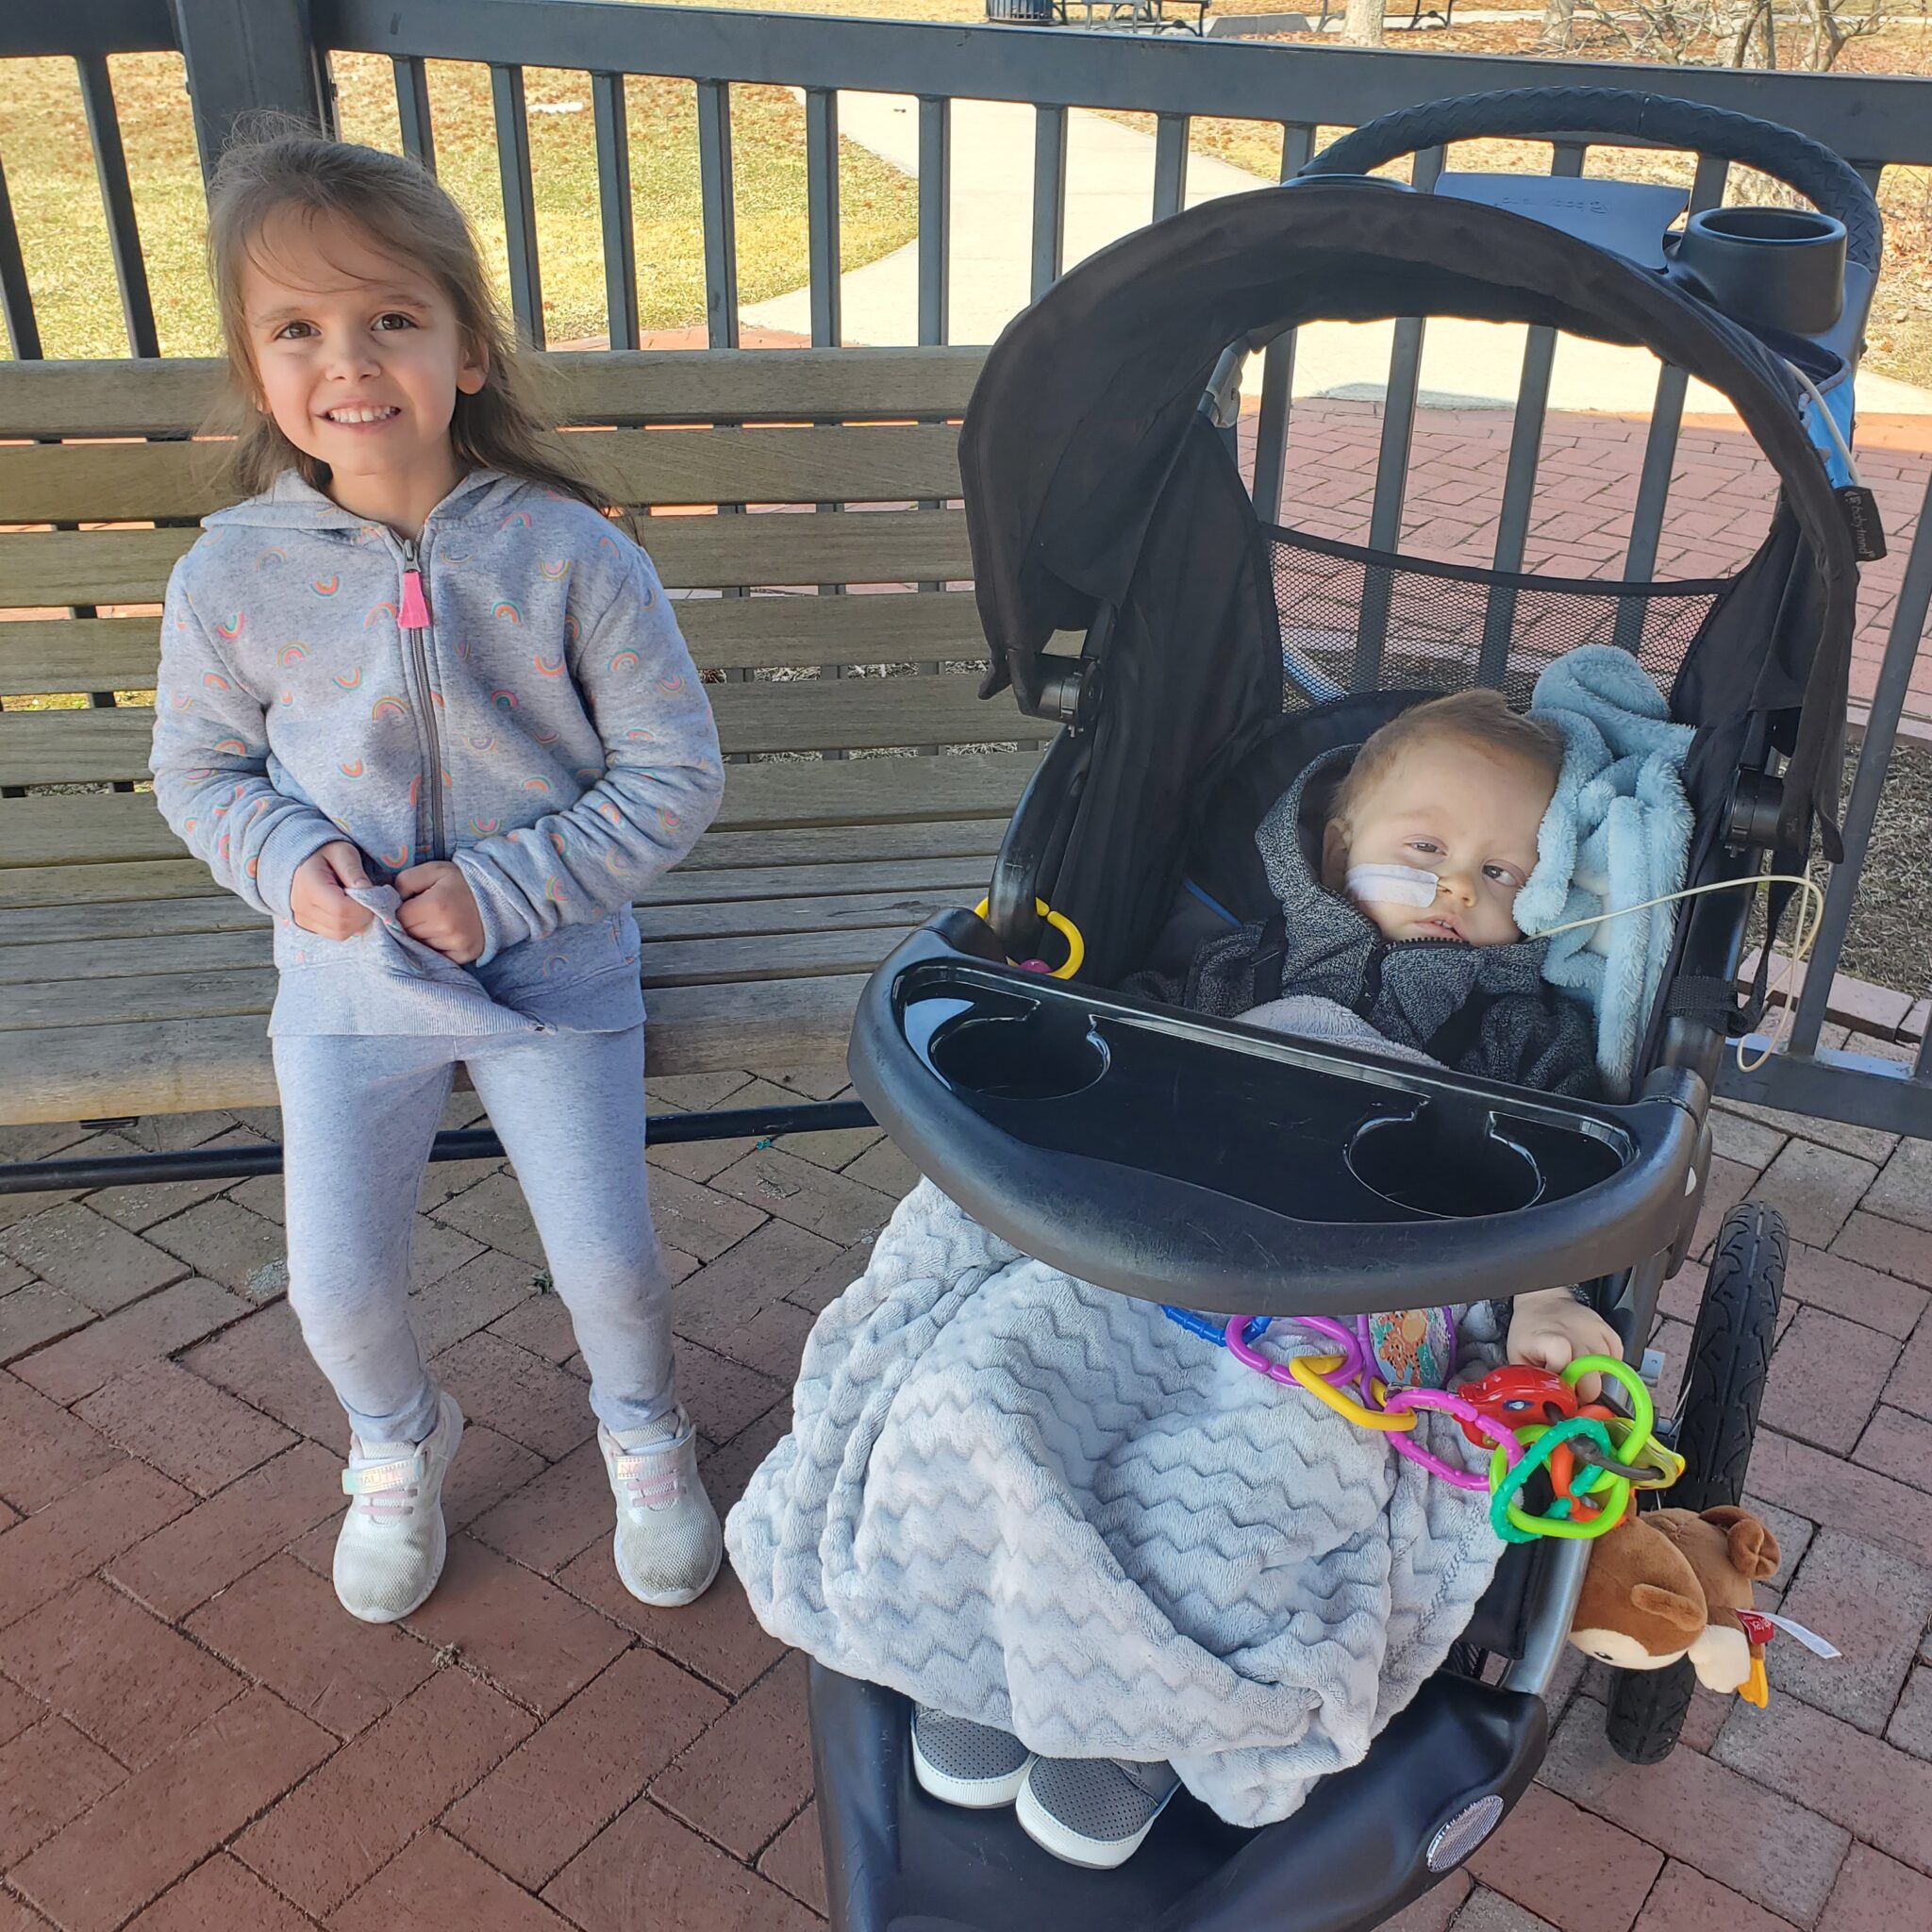 Sister posing for a photo next to her baby brother in a black stroller